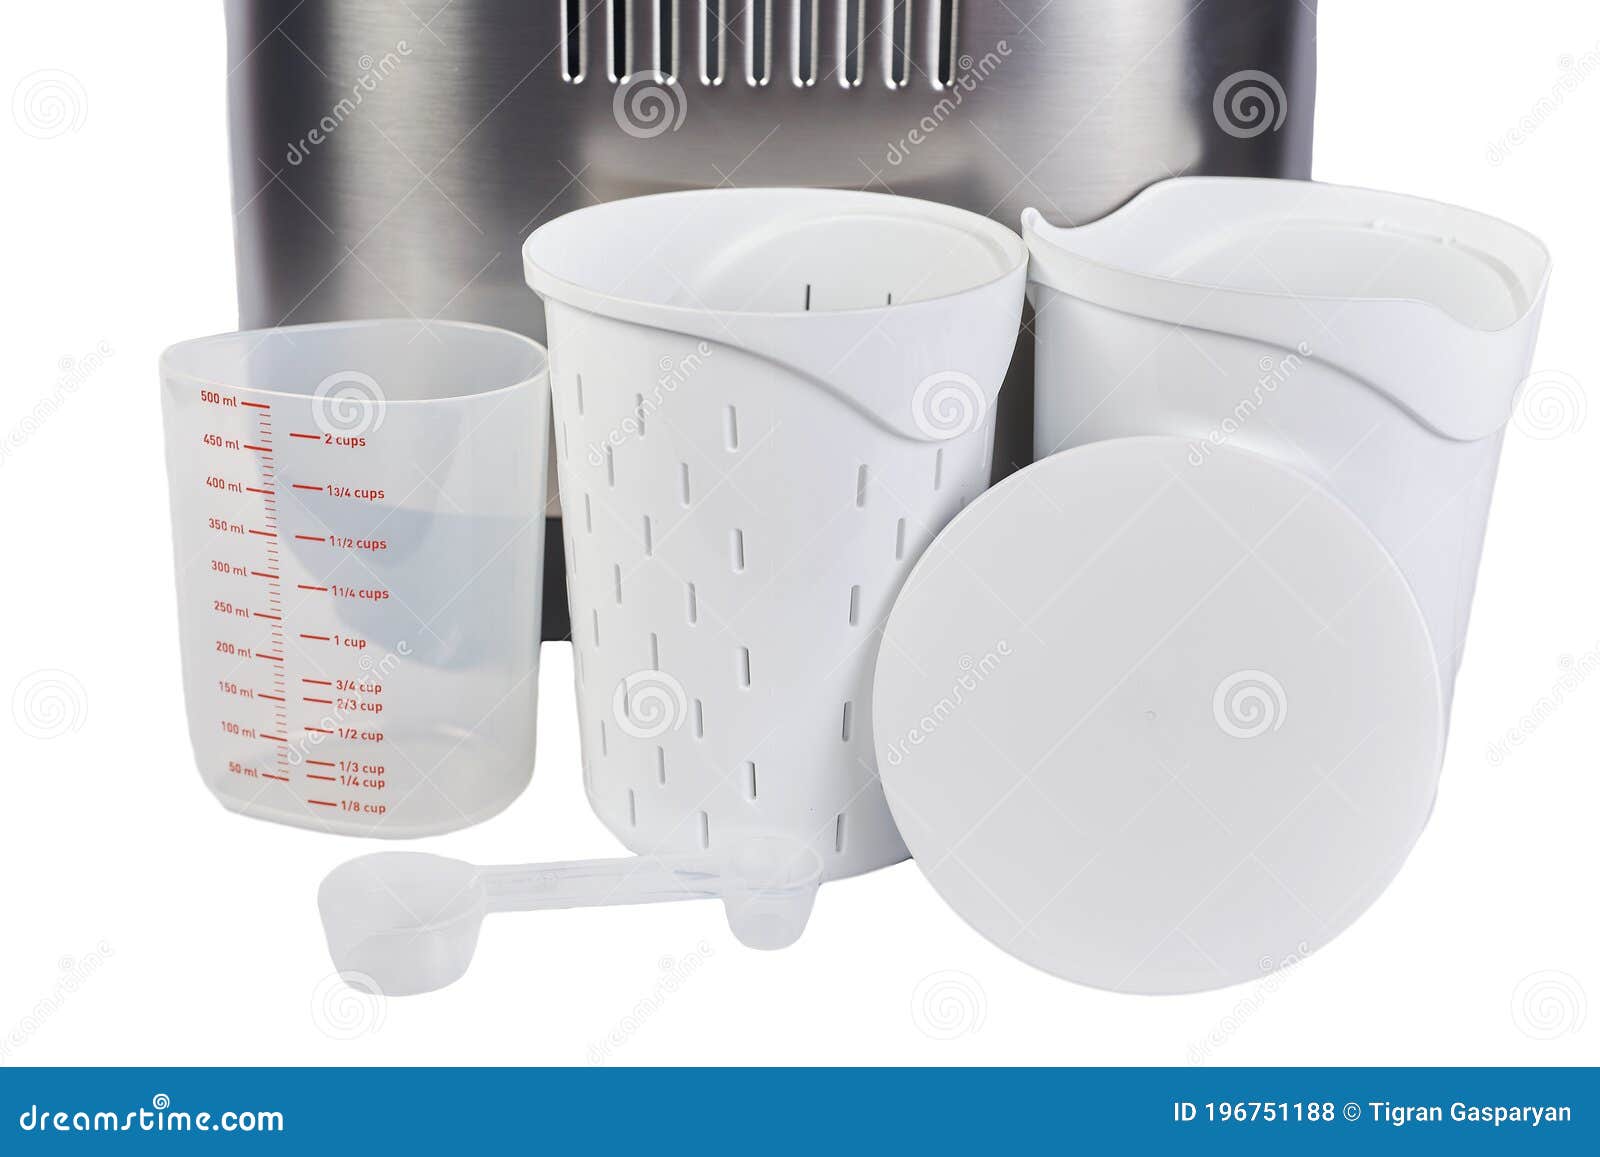 Bread Maker Accessories Isolated On White Background Plastic Measuring Cup Scoop And Cup Stock Photo Image Of Metal Electric